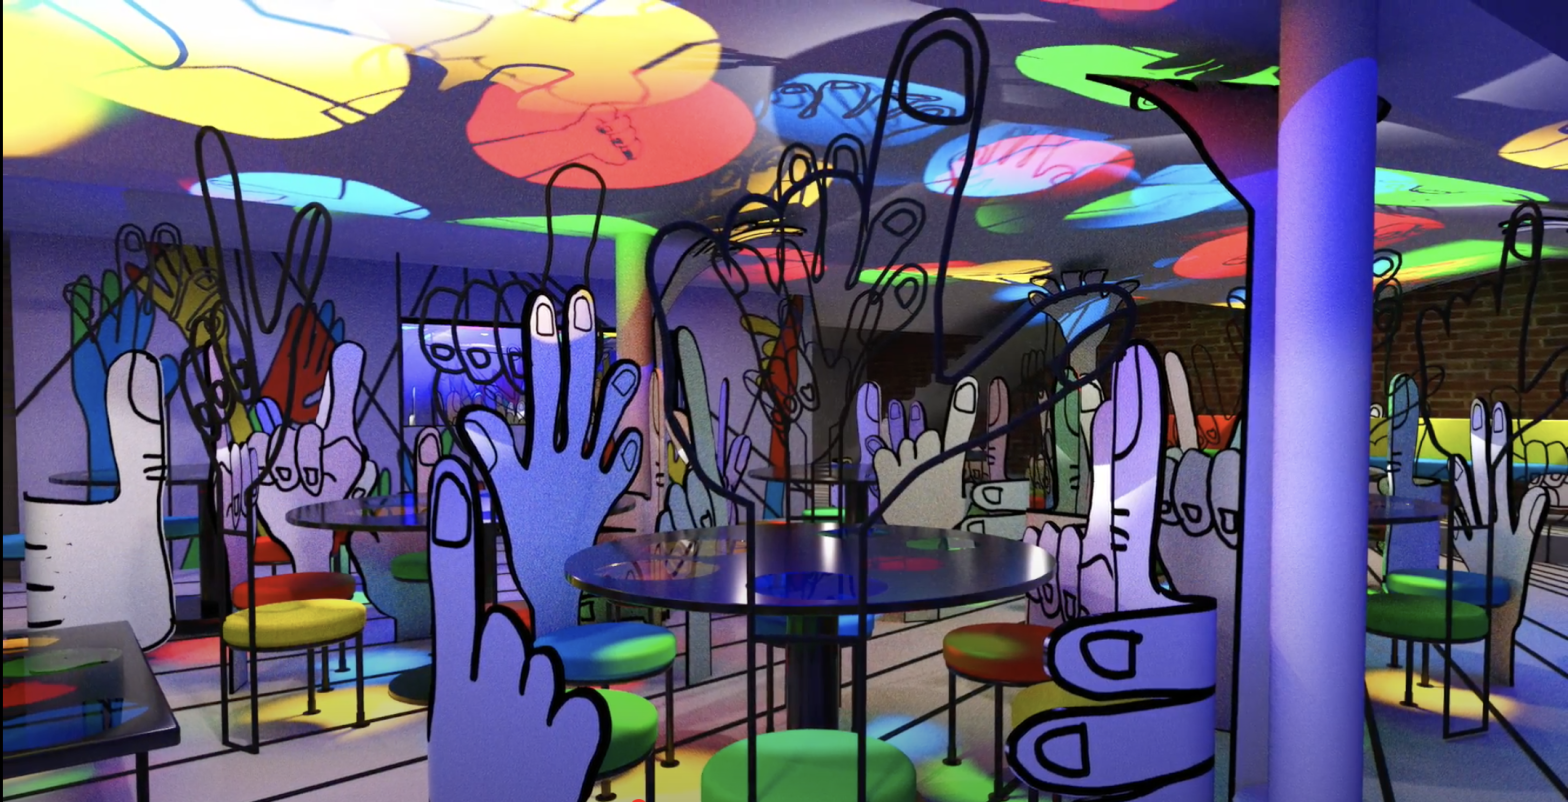 A colourful drawing depicting a brightly coloured basement space decorated with spotlights, tables and chairs that looks like hands pointing lots of different directions